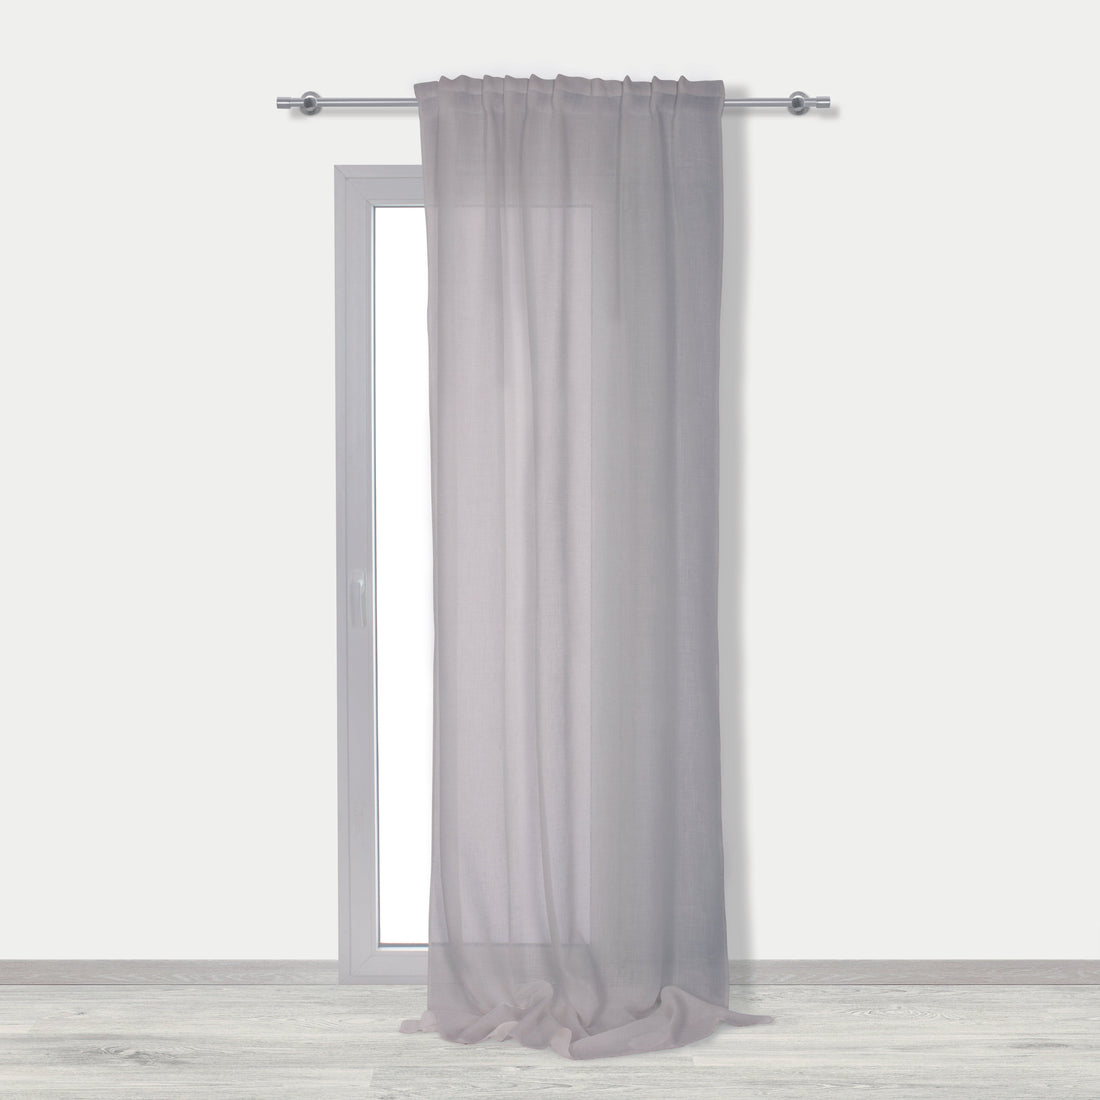 LILY WHITE OPAQUE CURTAIN 135X350 WITH WEBBING AND CONCEALED LOOP - best price from Maltashopper.com BR480008767